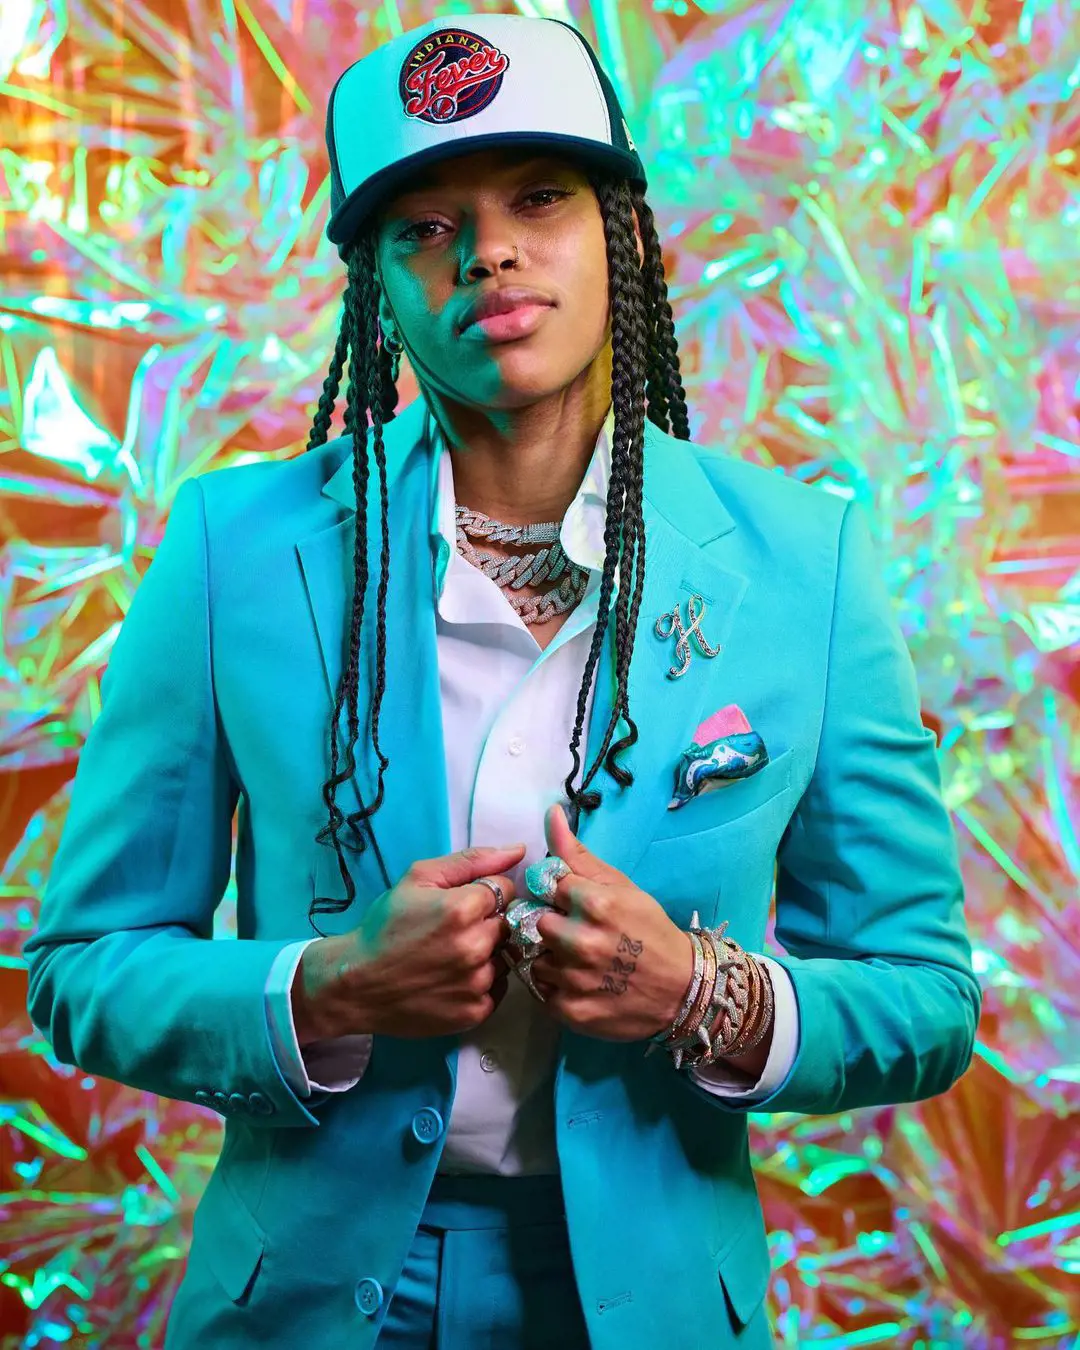 Henderson in a stylish Turquoise color suit in April 2022